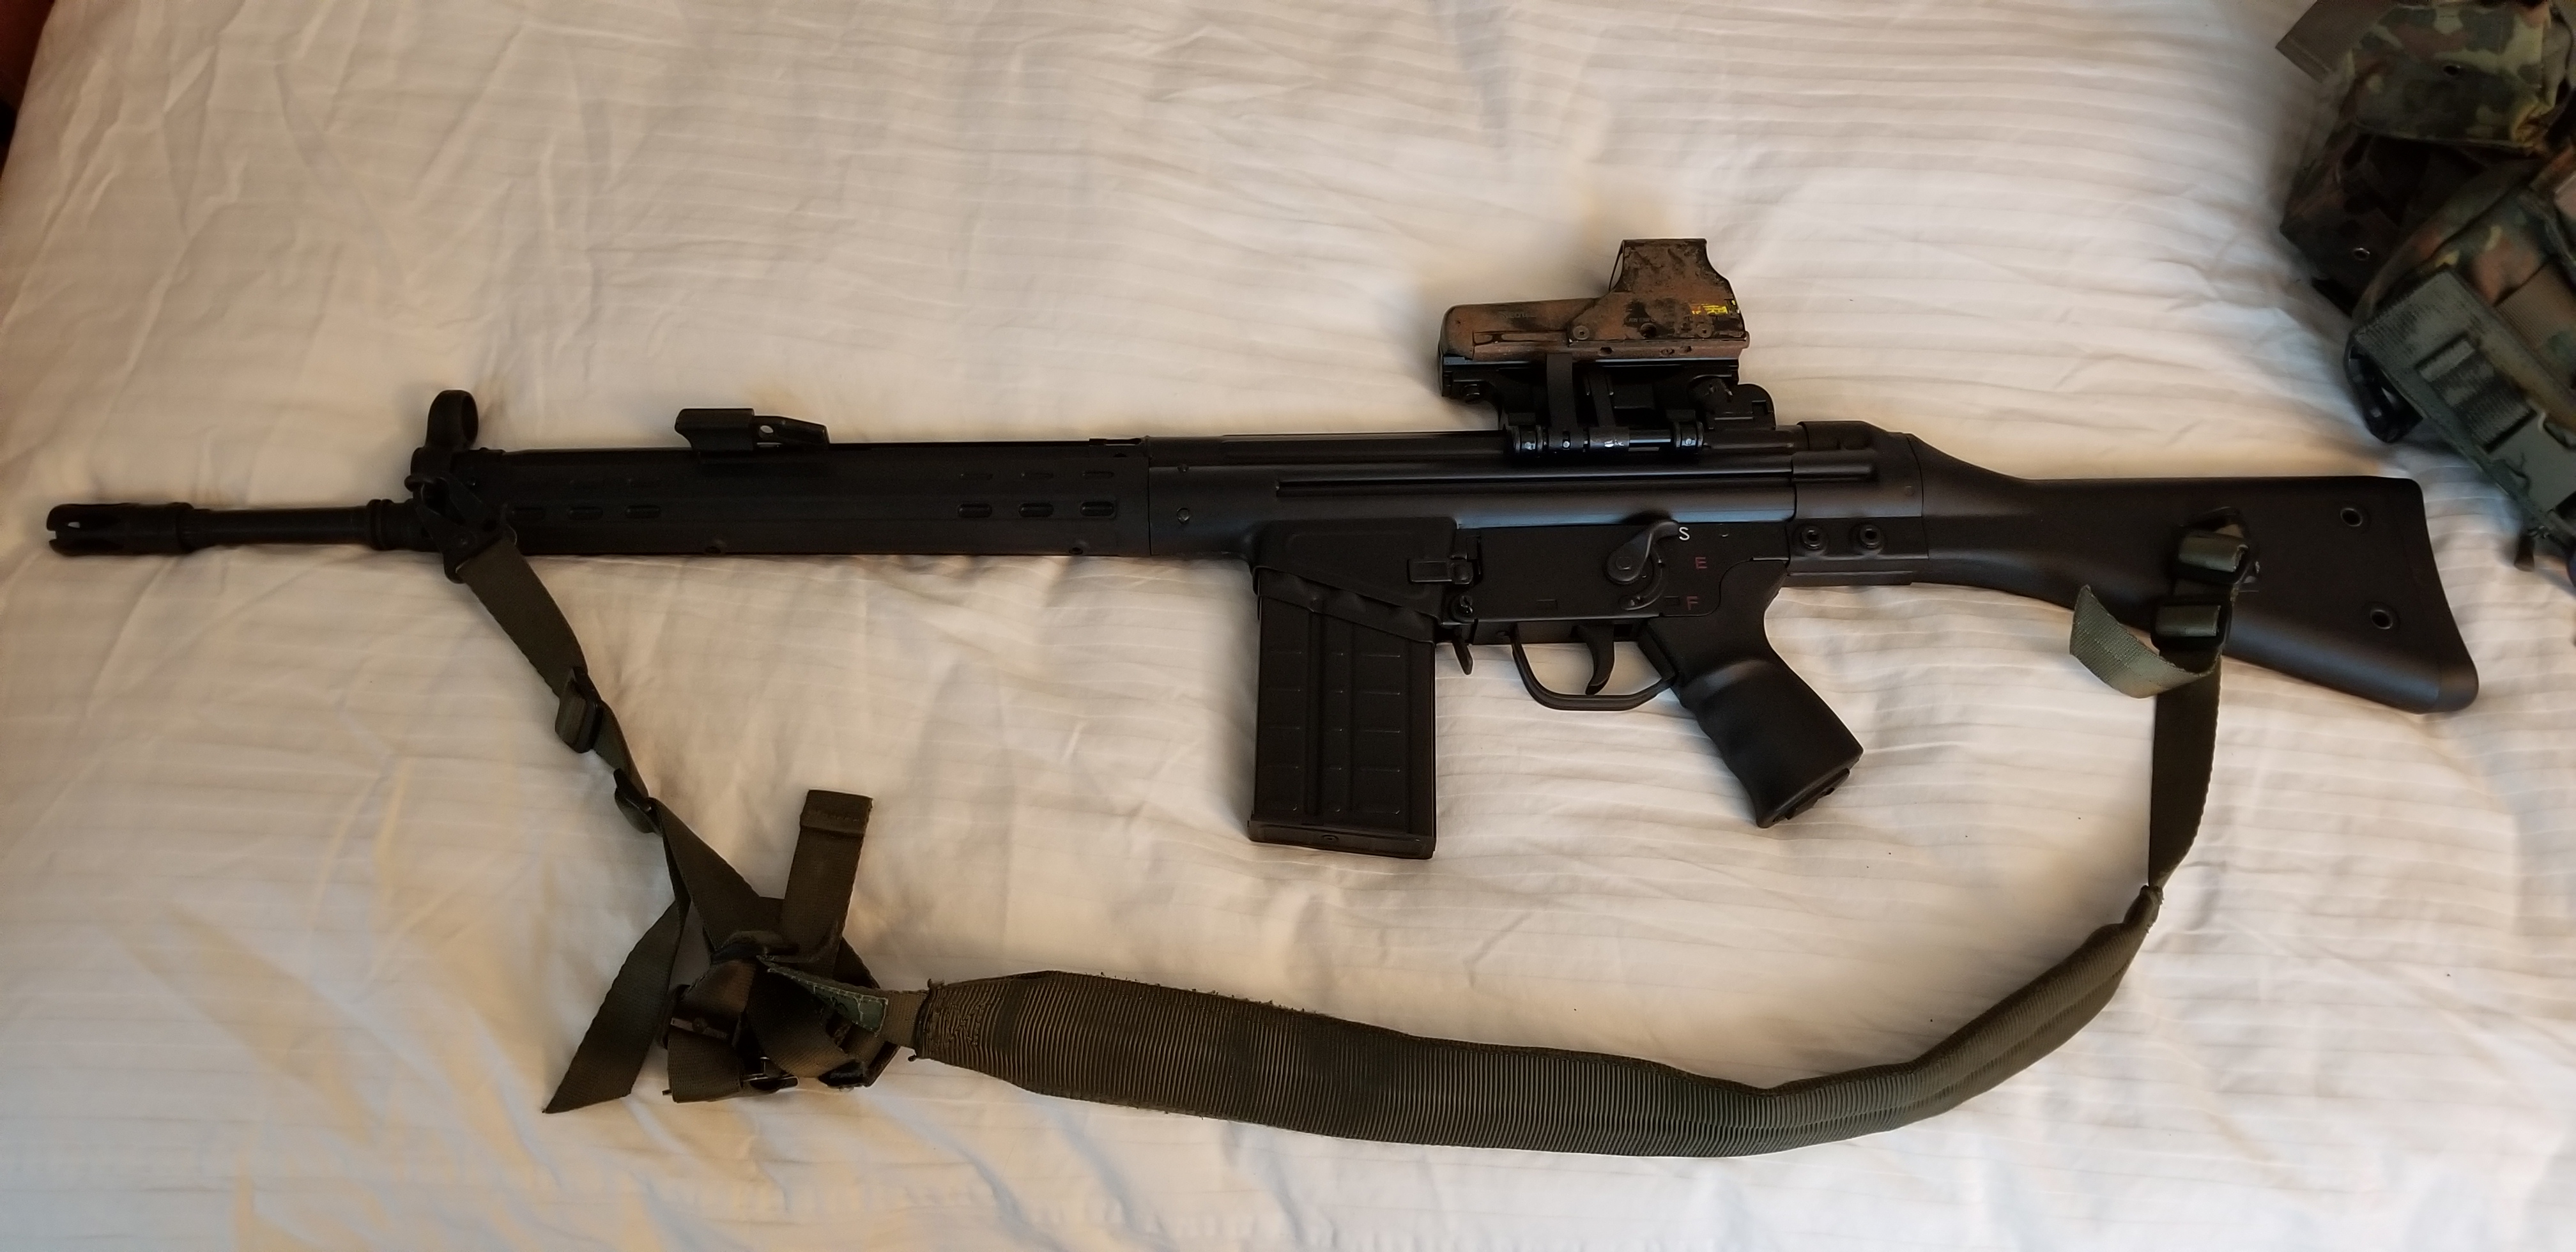 Finally got my hands on the LCT G3a3 replica. 